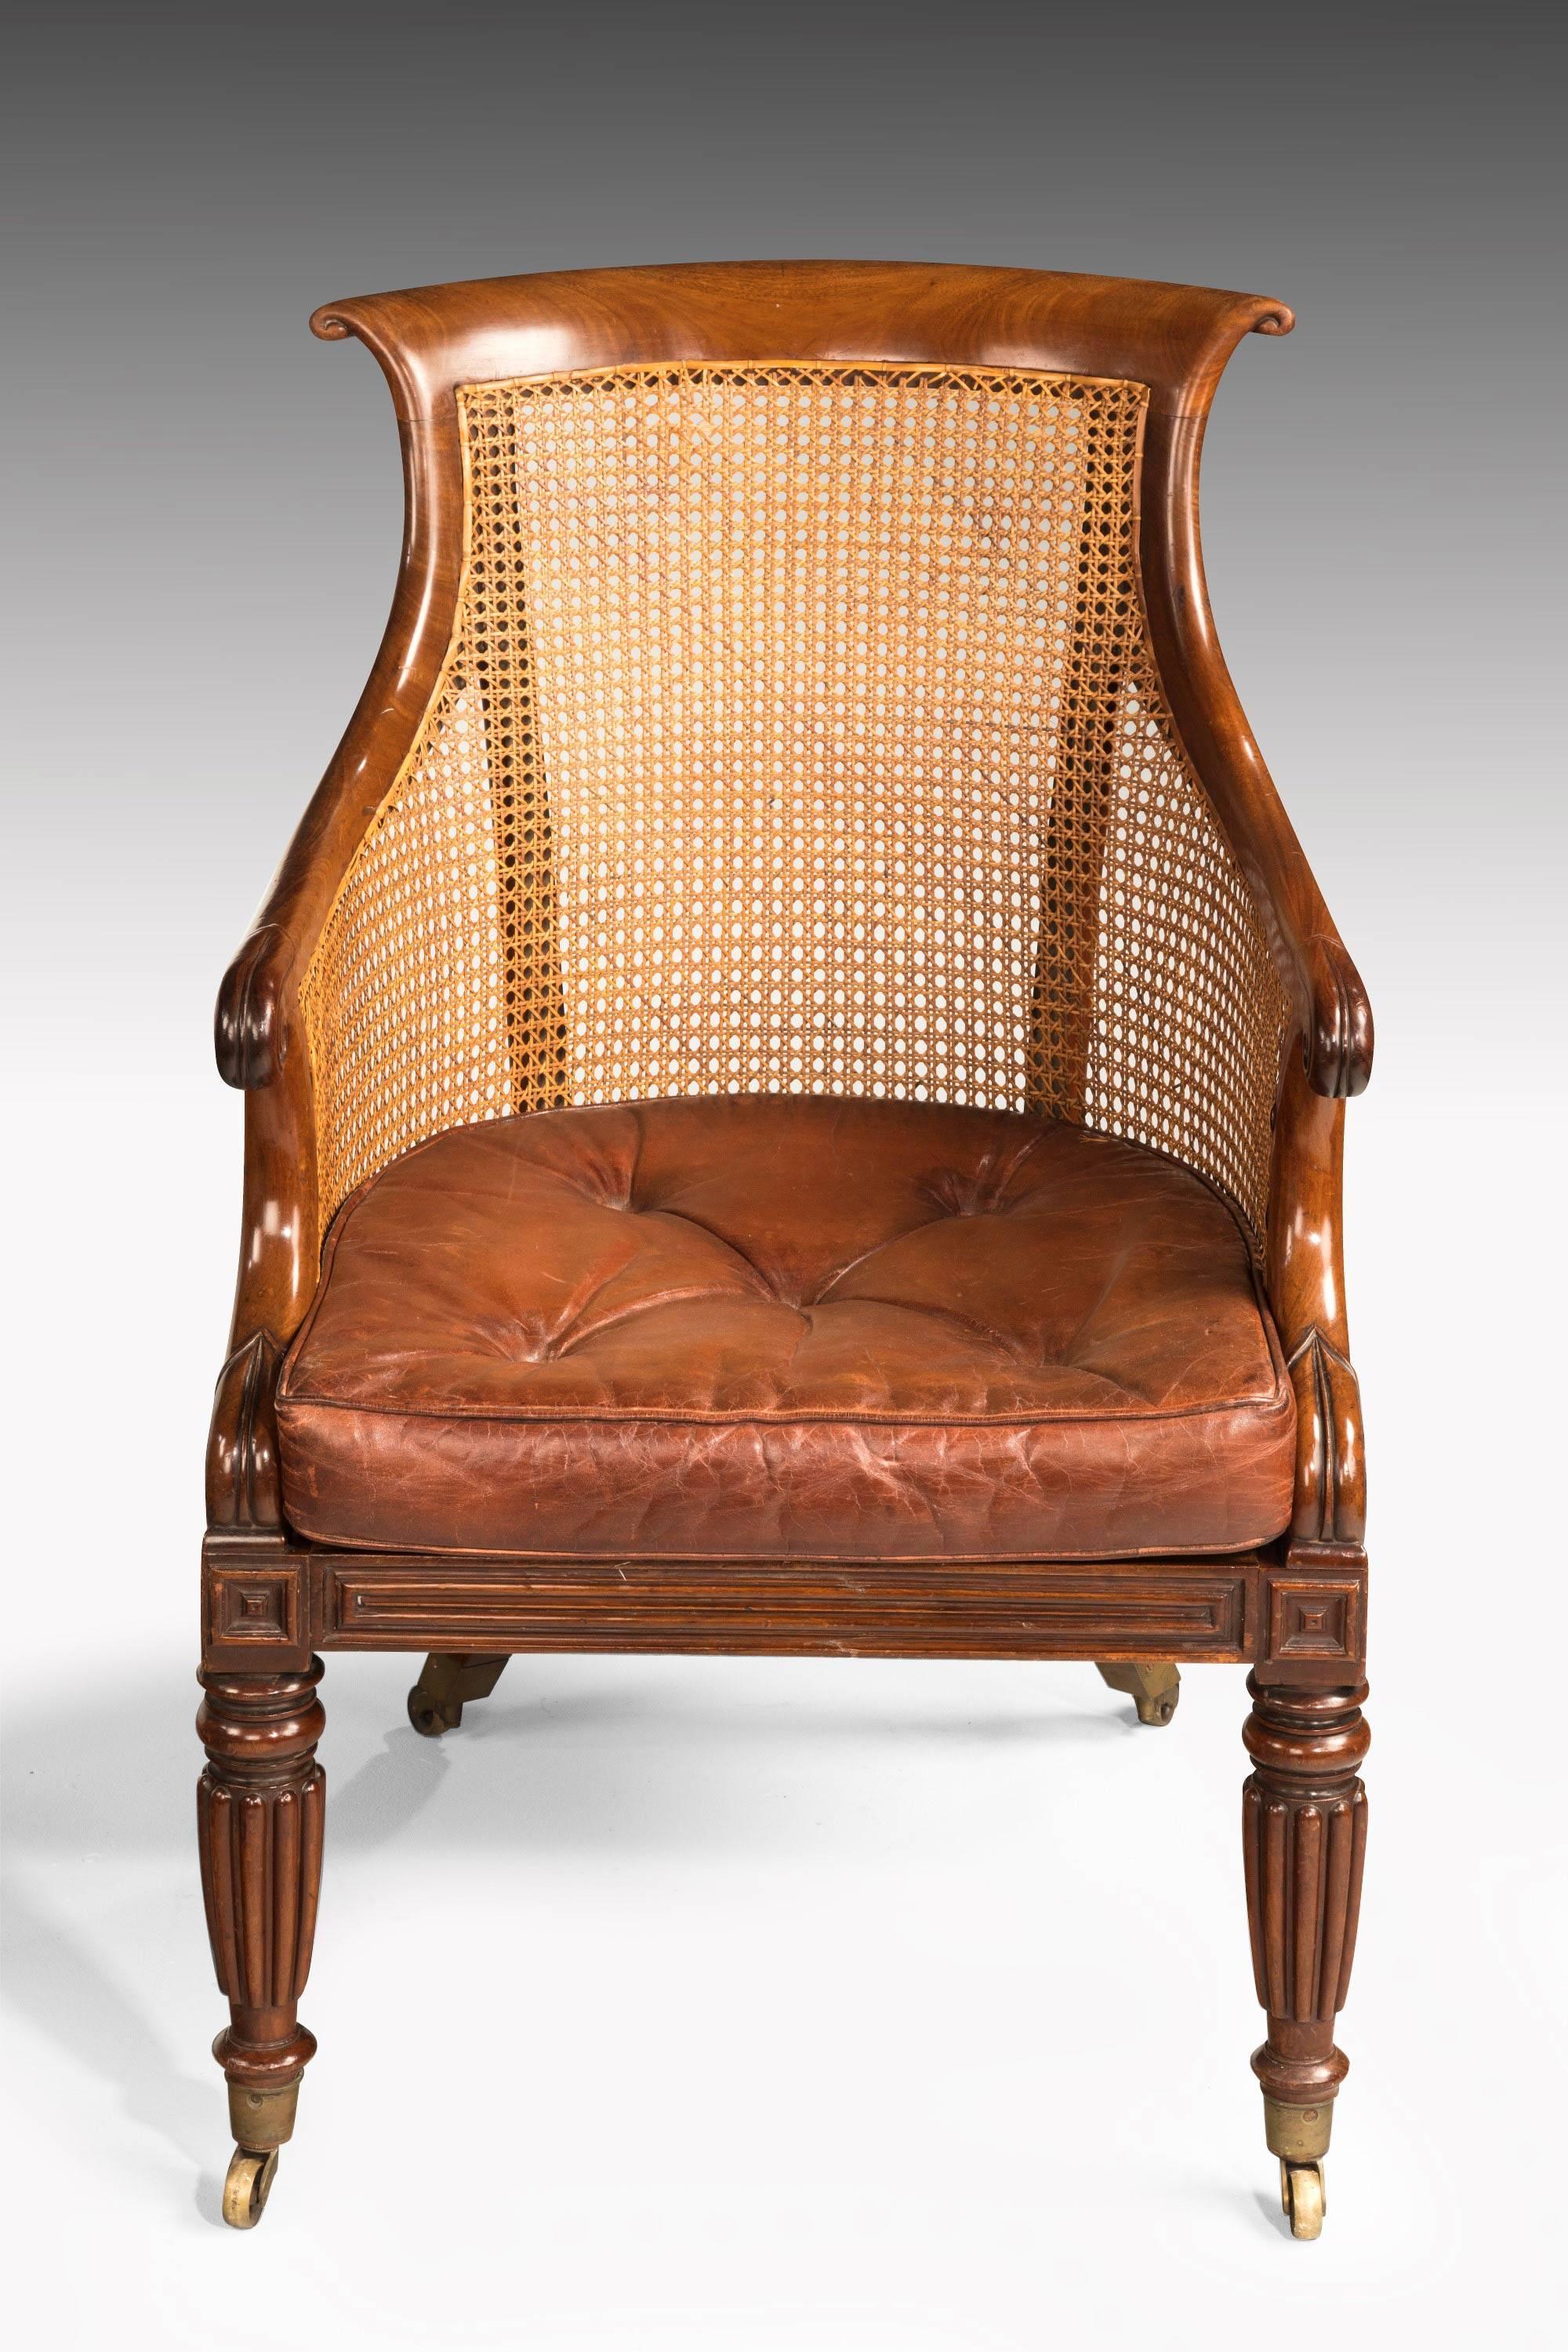 19th Century Pair of Regency Period Bergère Library Chairs with Swept Arms